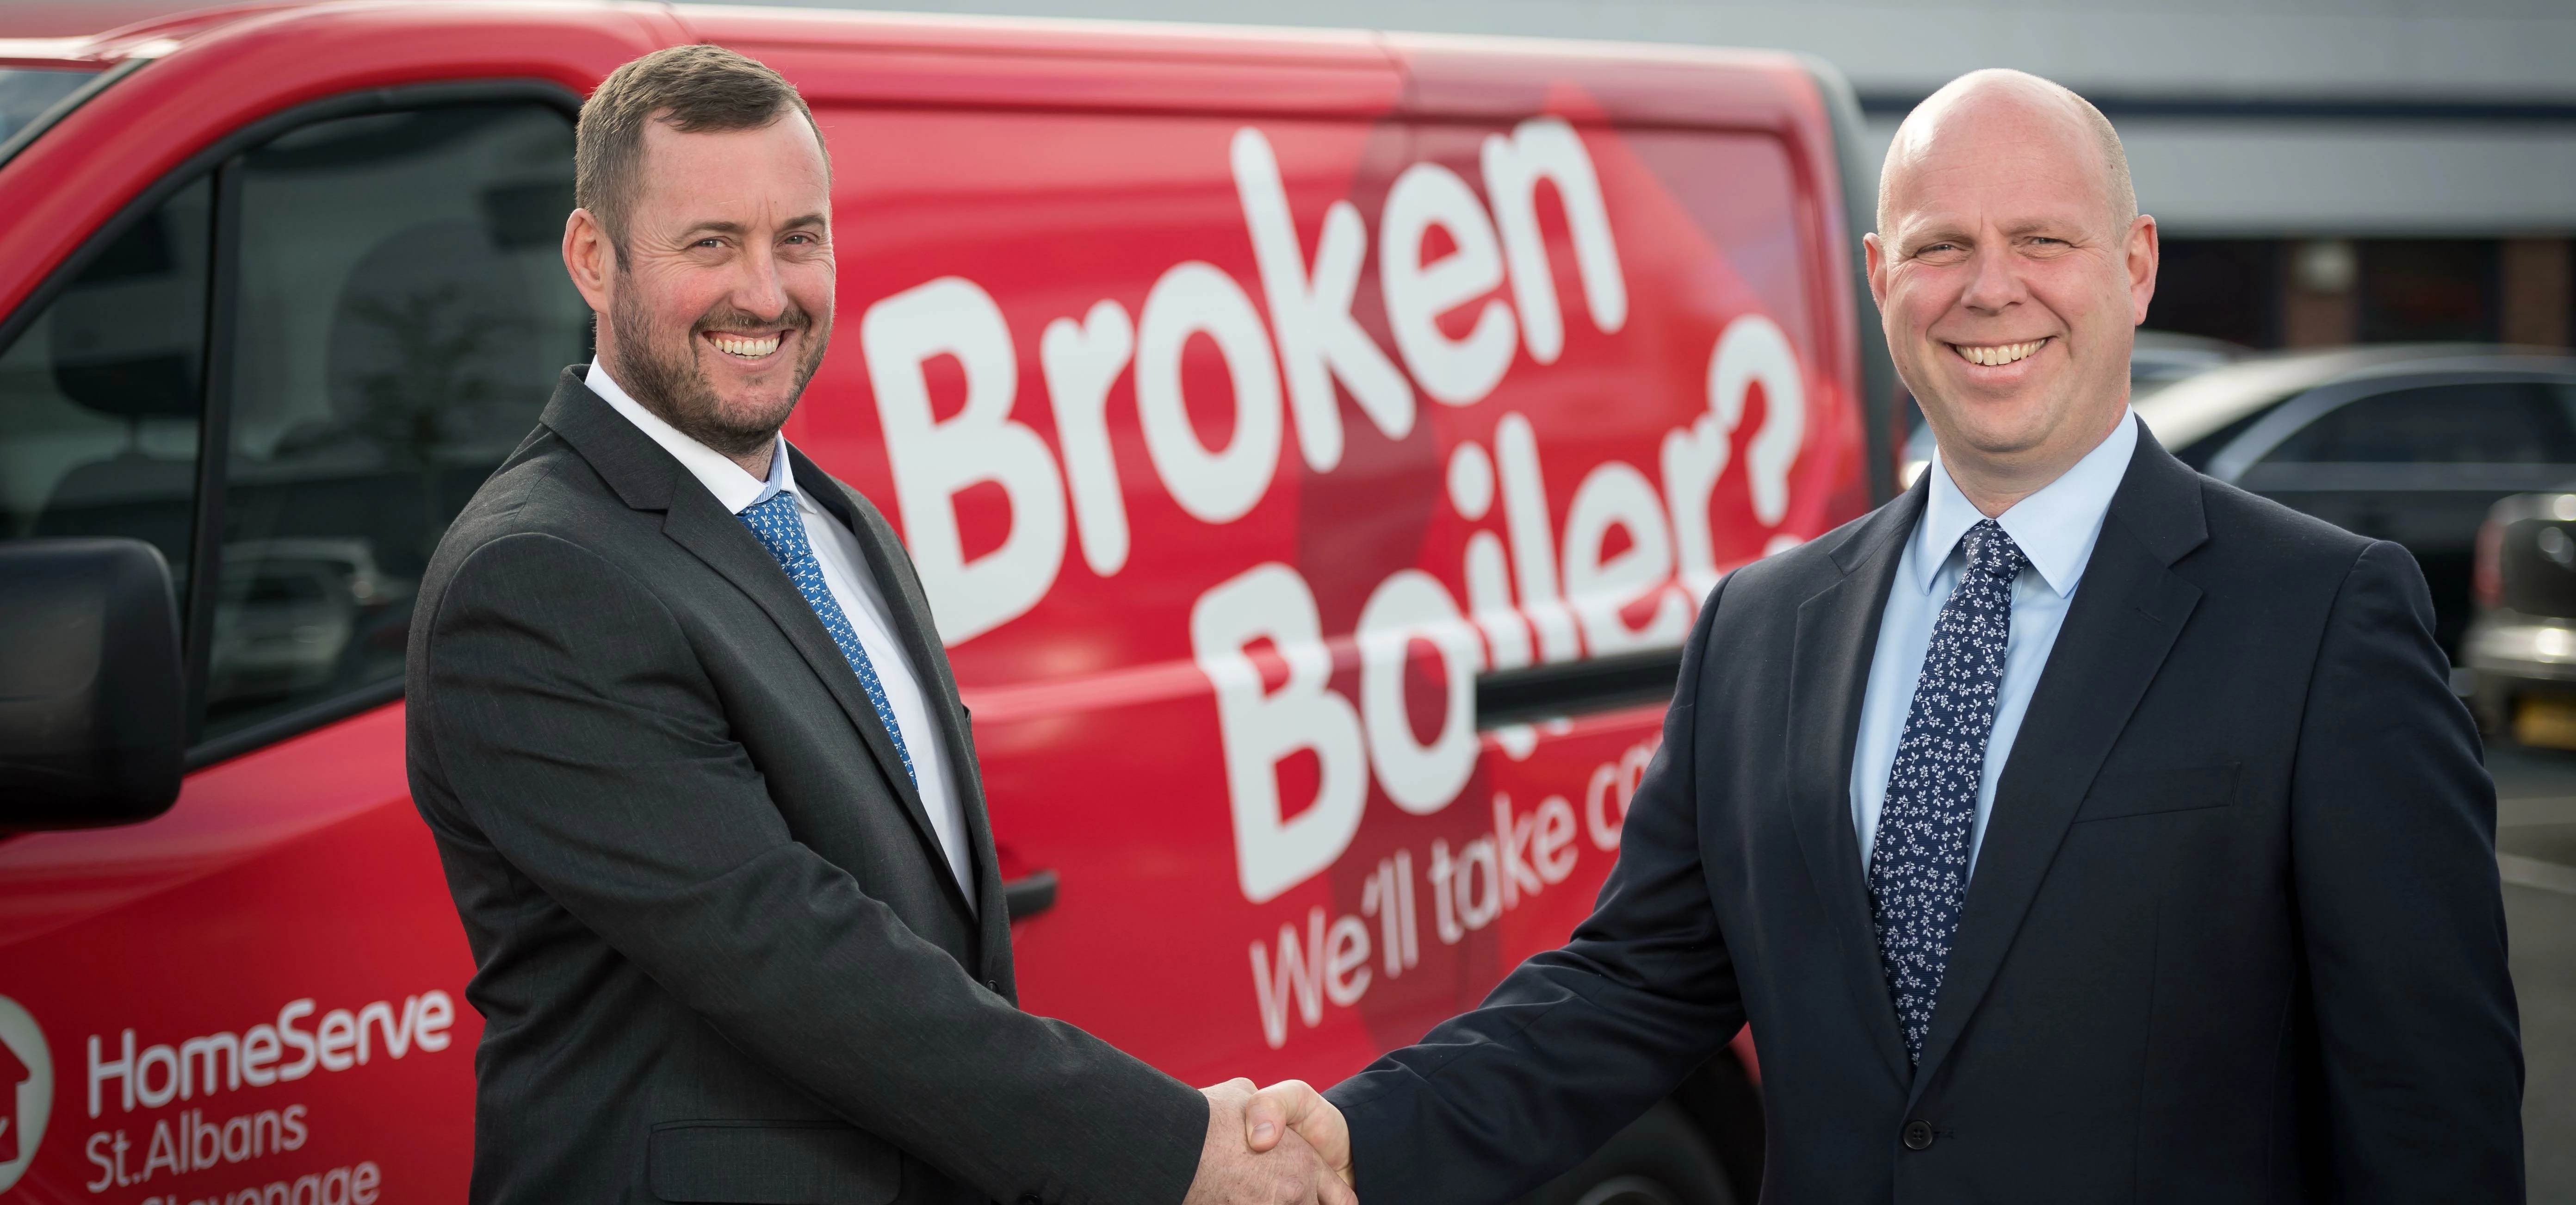 (From Left to right) Matt Craughwell, Managing Director of 24-7 Plumbing & Heating Ltd with Thomas R